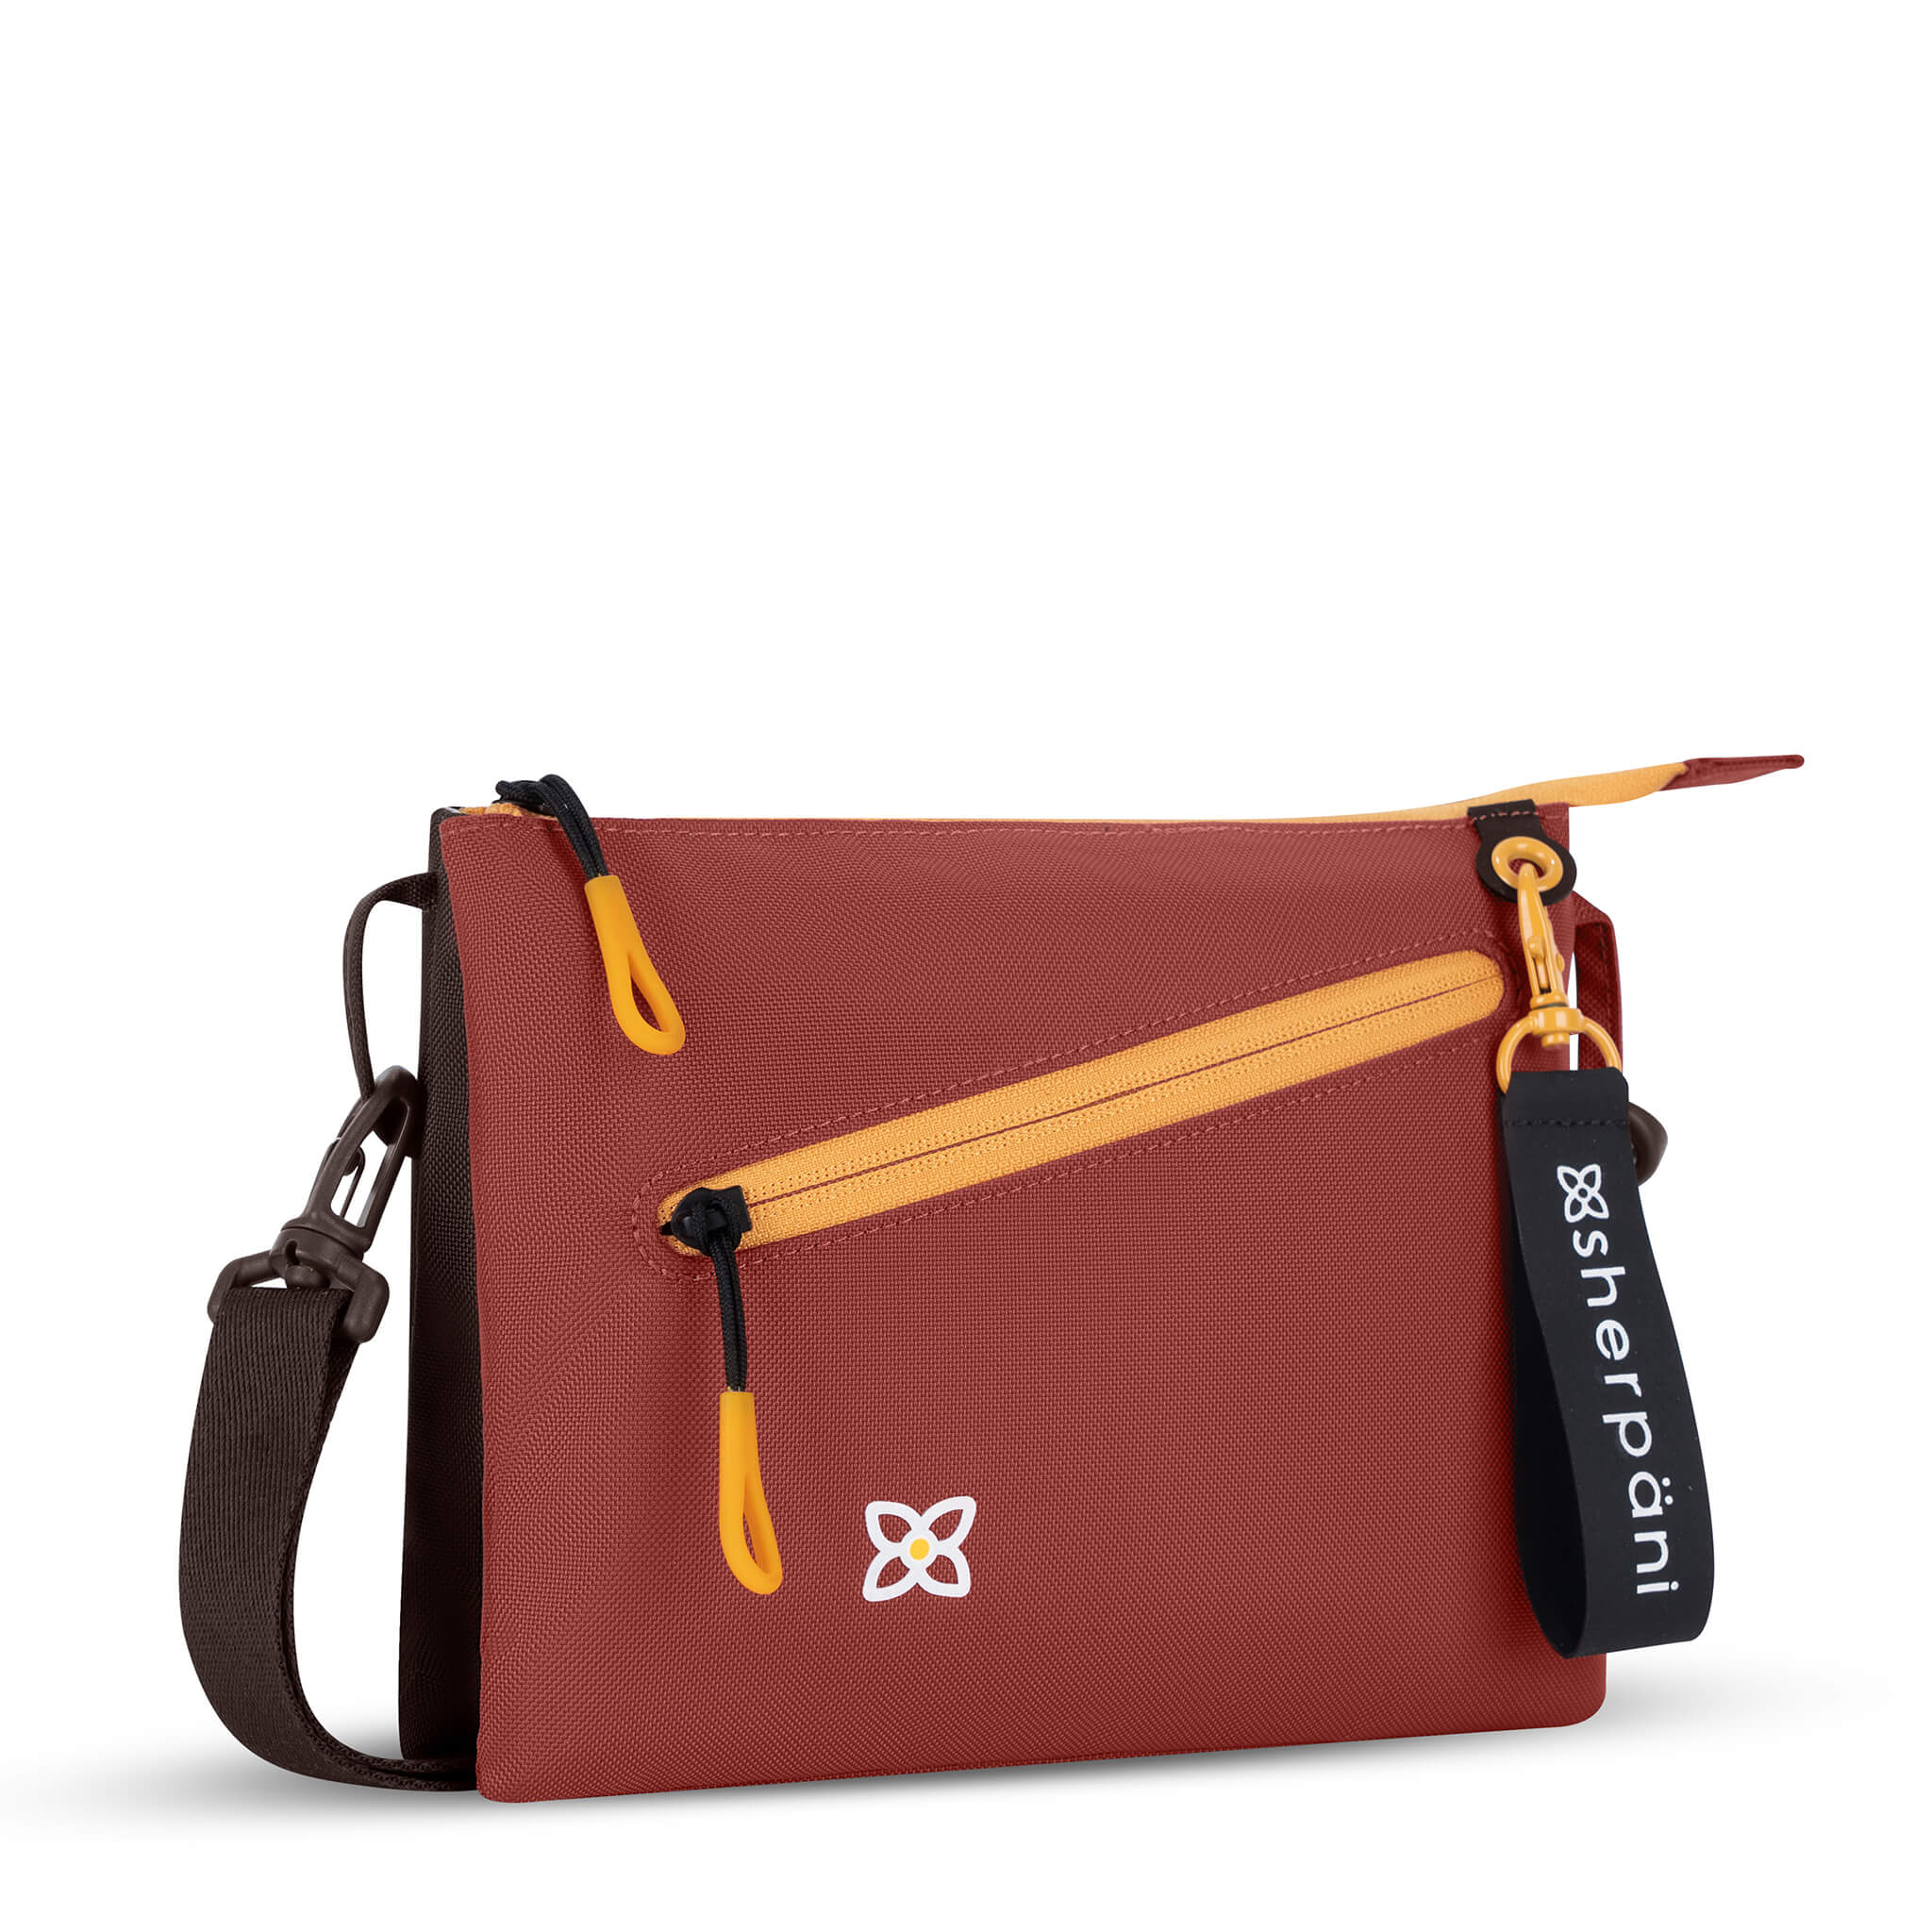 Angled front view of Sherpani small crossbody bag, the Zoom in Cider. Special features of the Zoom include RFID protection, adjustable crossbody strap, removable strap, removable keychain, outside zipper pocket, internal divider, internal zipper pockets and back slip pocket. The Cider color is two-toned in dark brown and burgundy with yellow accents.